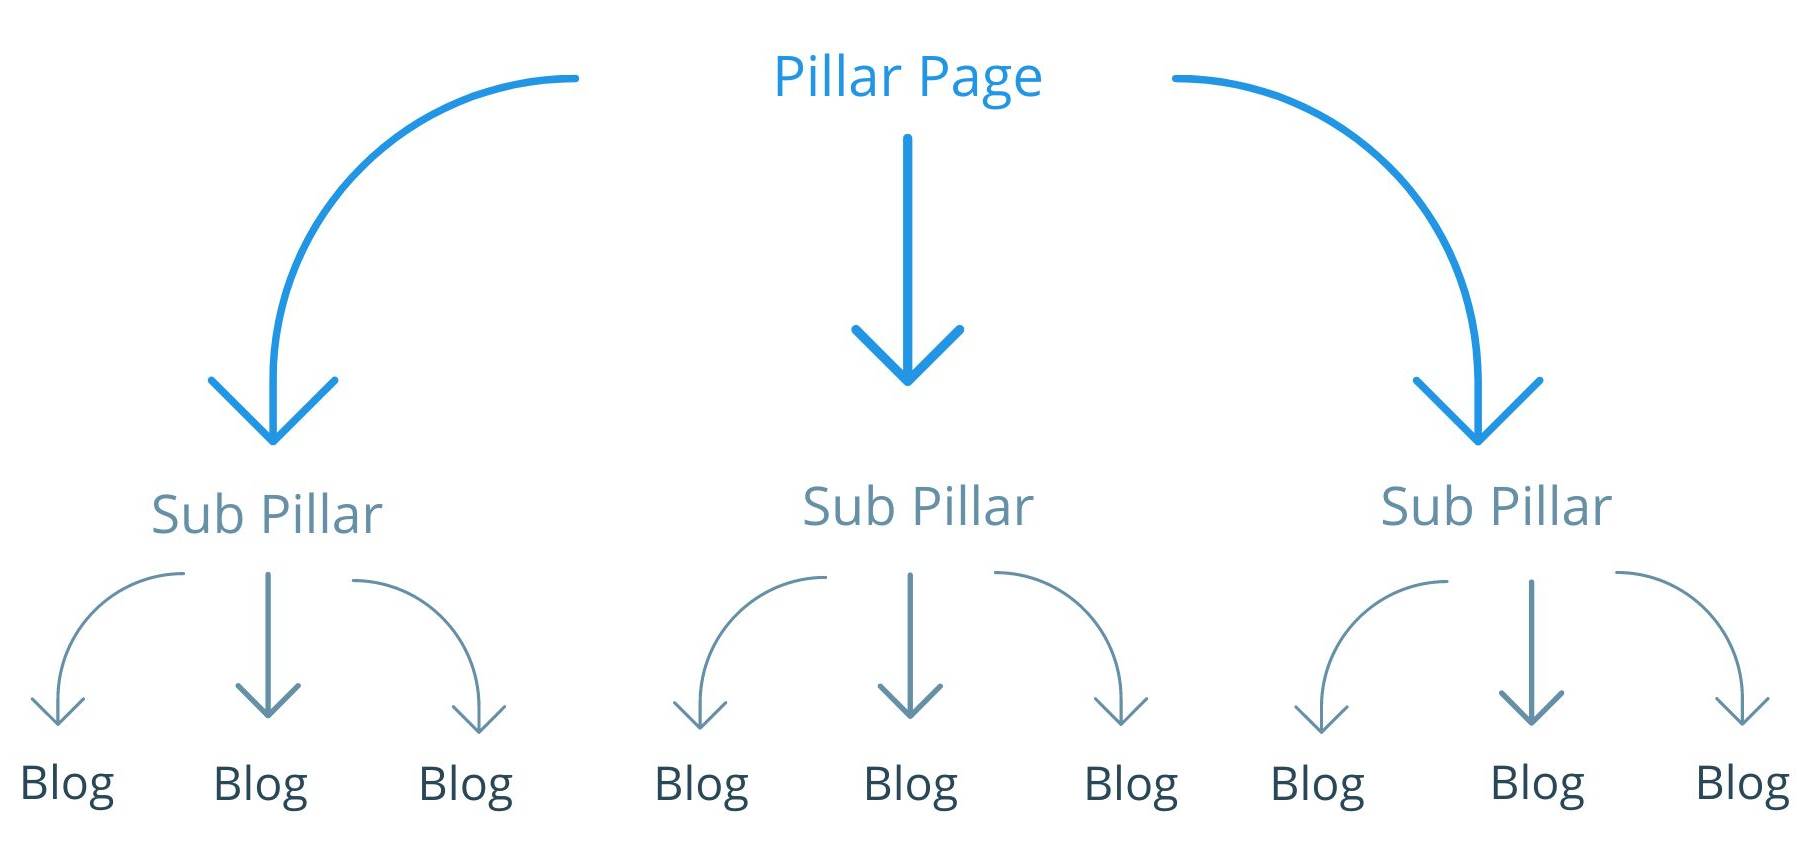 Pillar strategy breakdown showing how you can determine your content pillars 